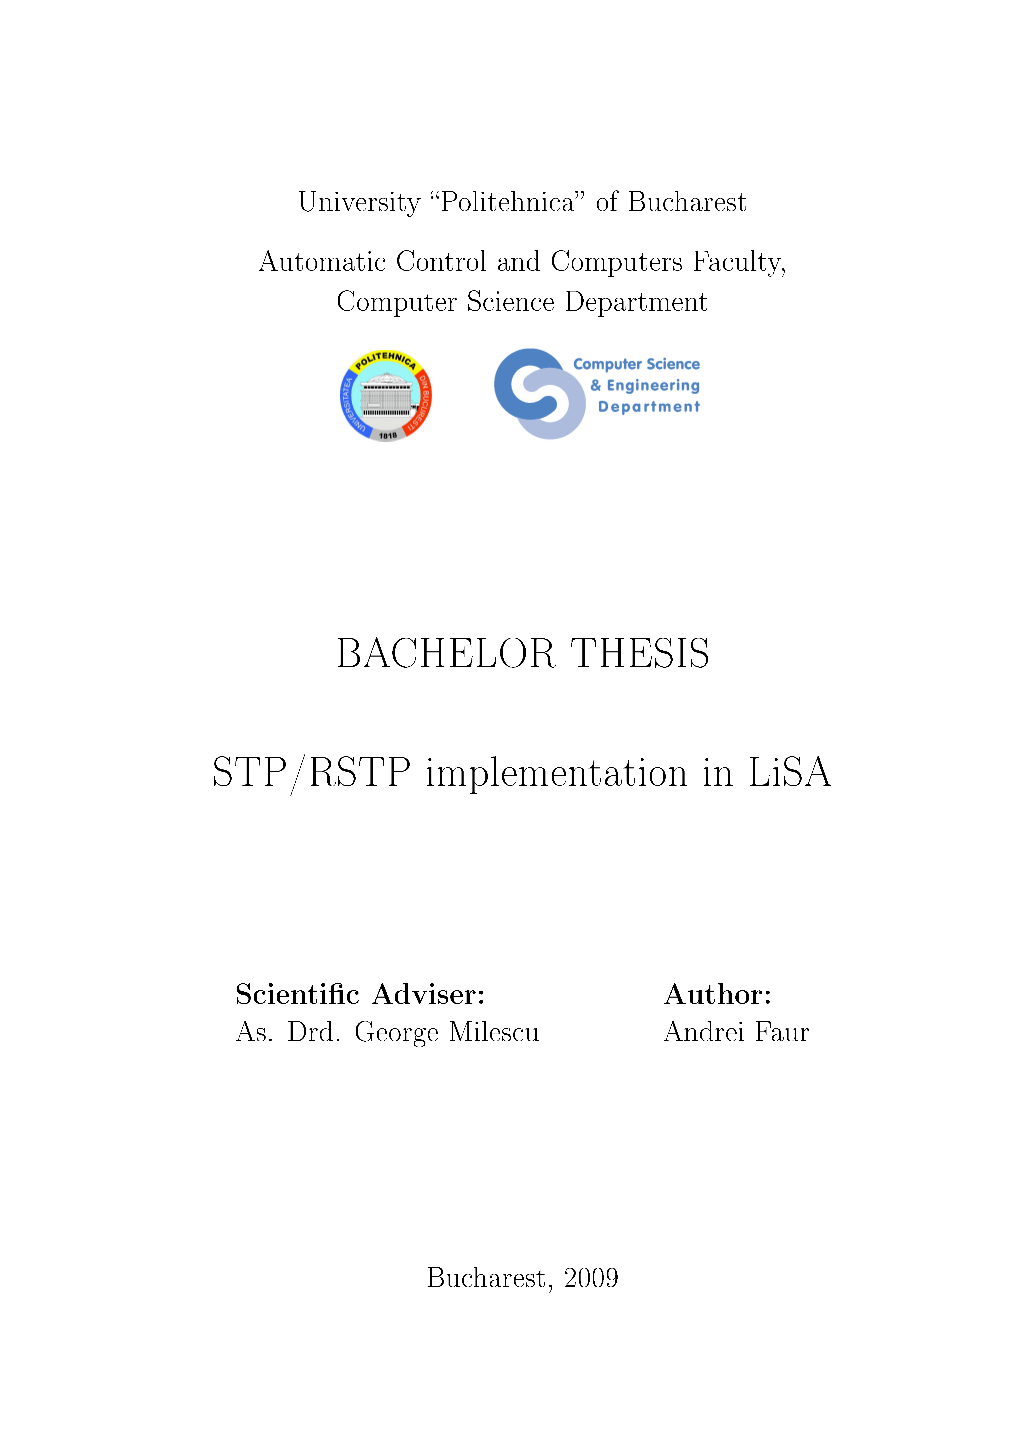 BACHELOR THESIS STP/RSTP Implementation in Lisa